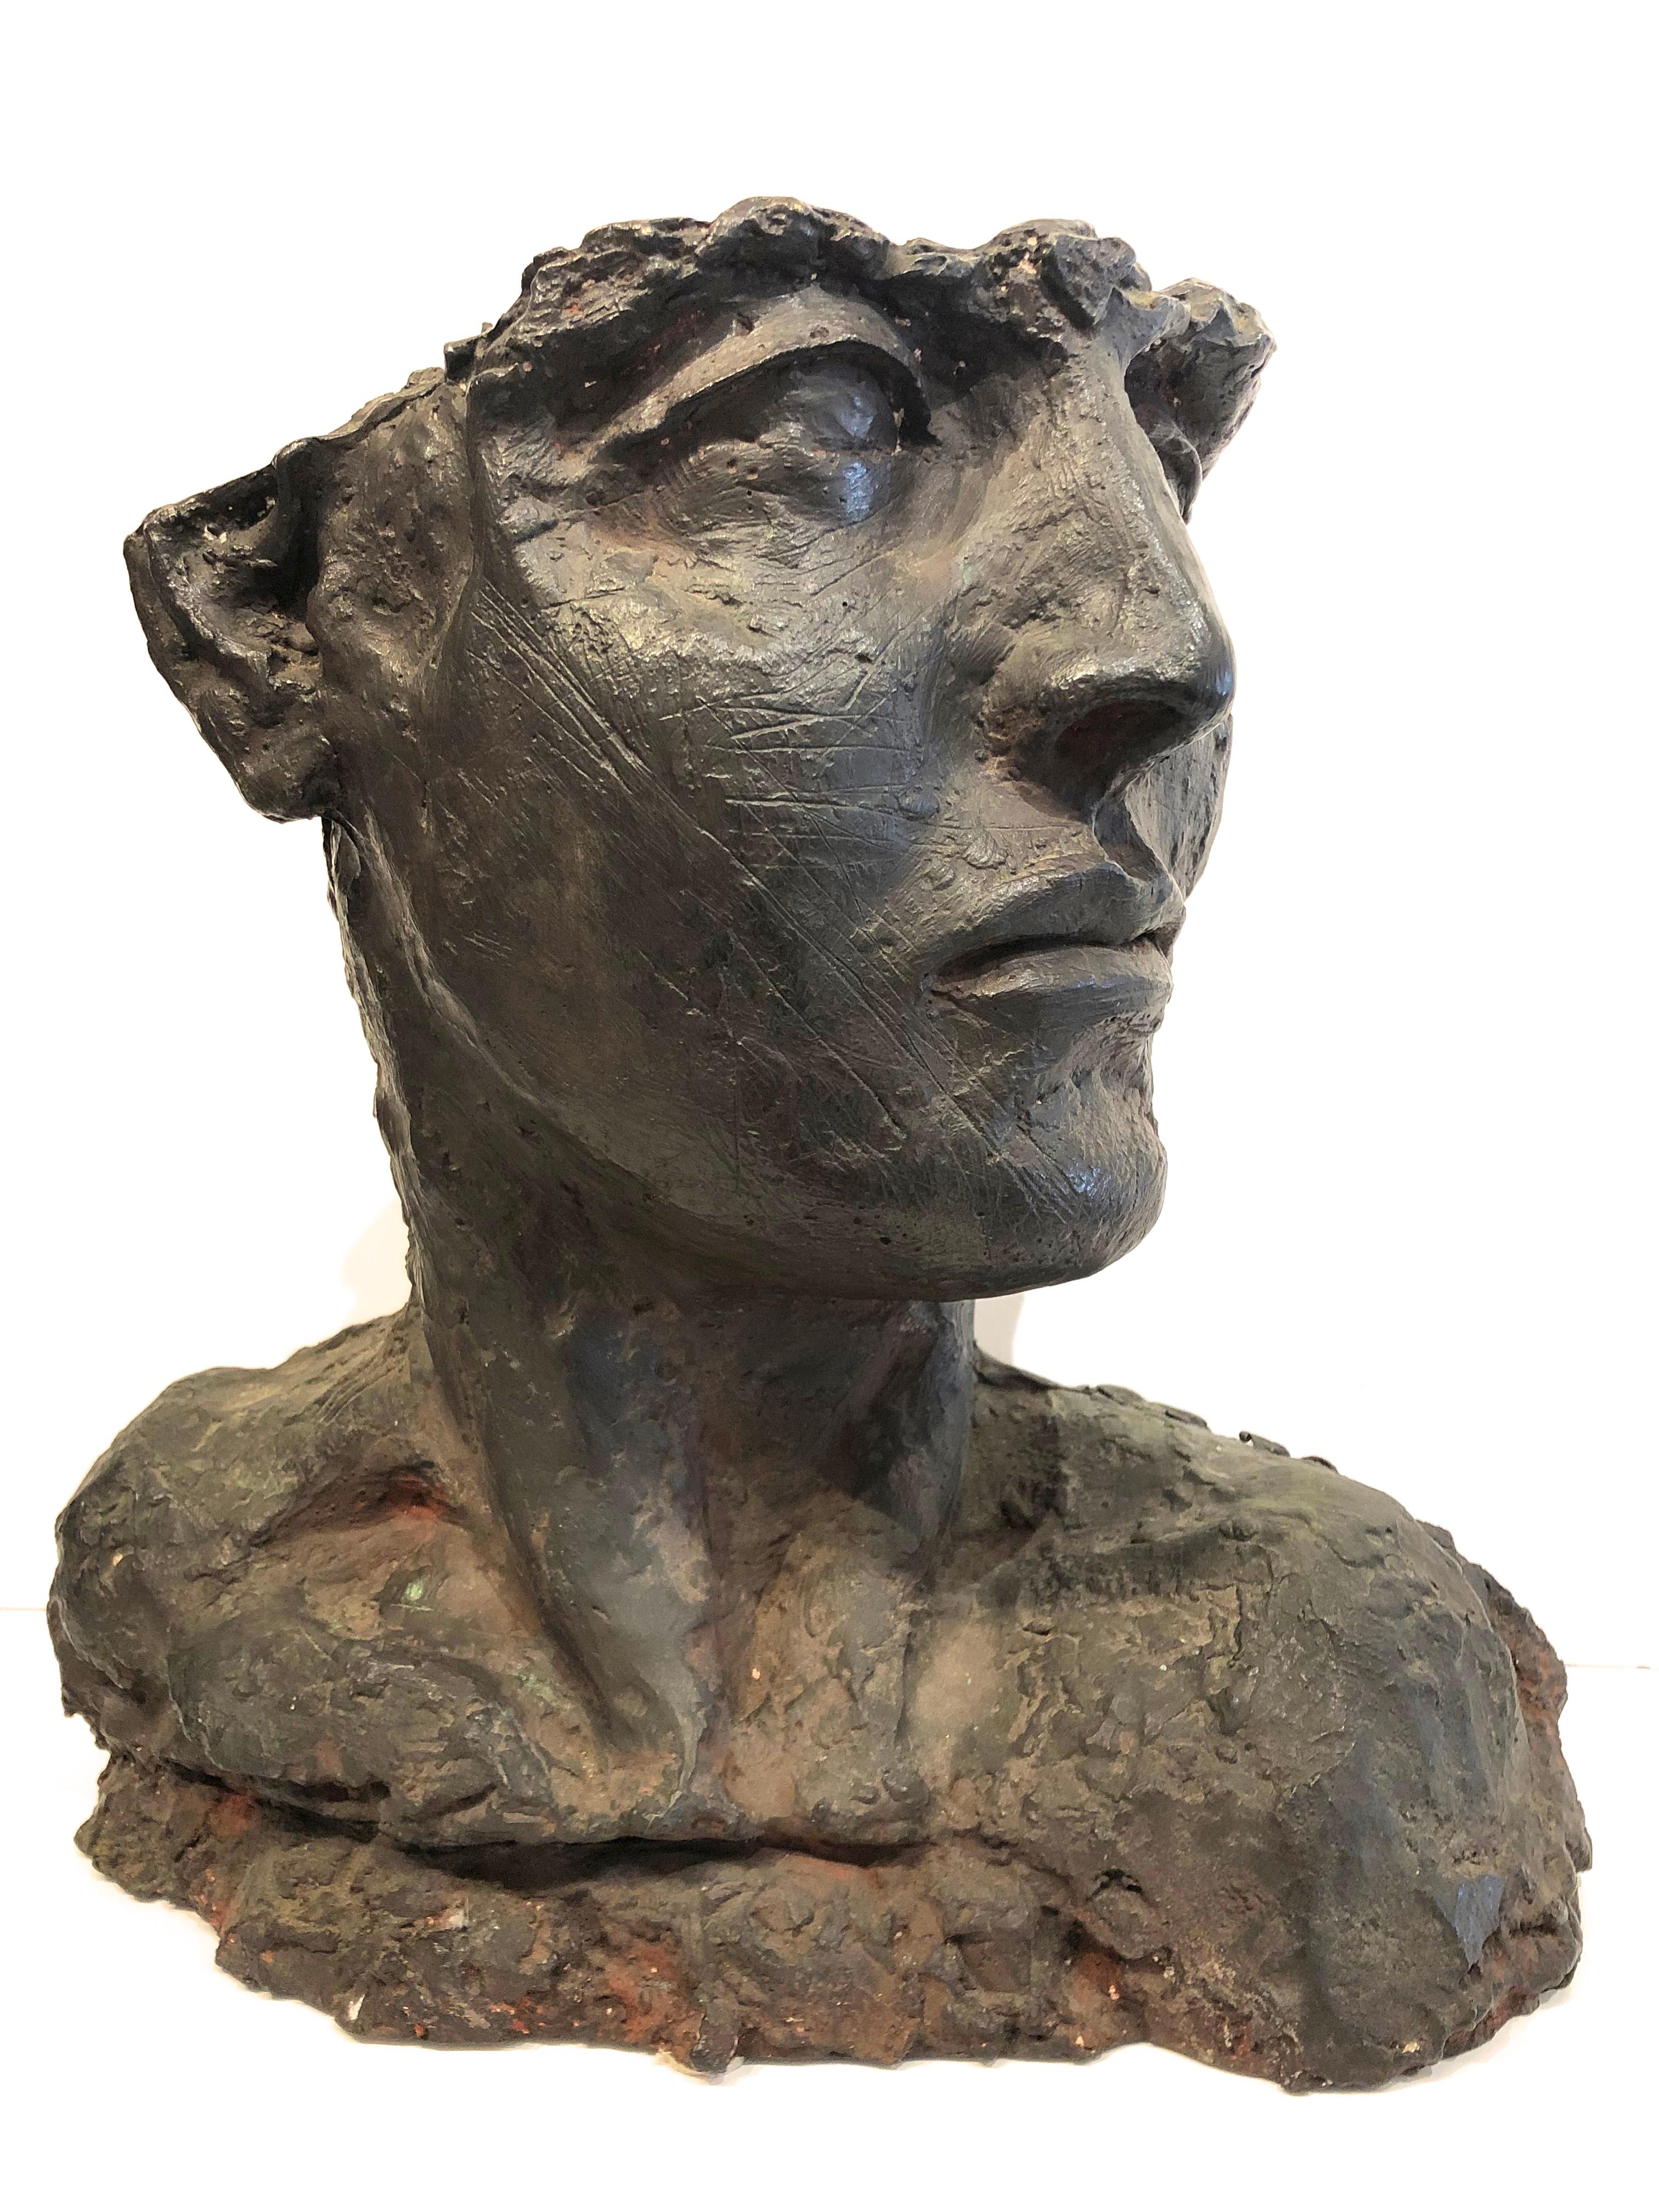 Bust of a Woman, bronze sculptue.
Bronze with dark brown patina signed on the back R. Cortazar 1/9.
Originally from Tapachula, Chiapas Mexico, he was born in 1962 into a family dedicated directly or indirectly to arts and crafts. His deep artistic